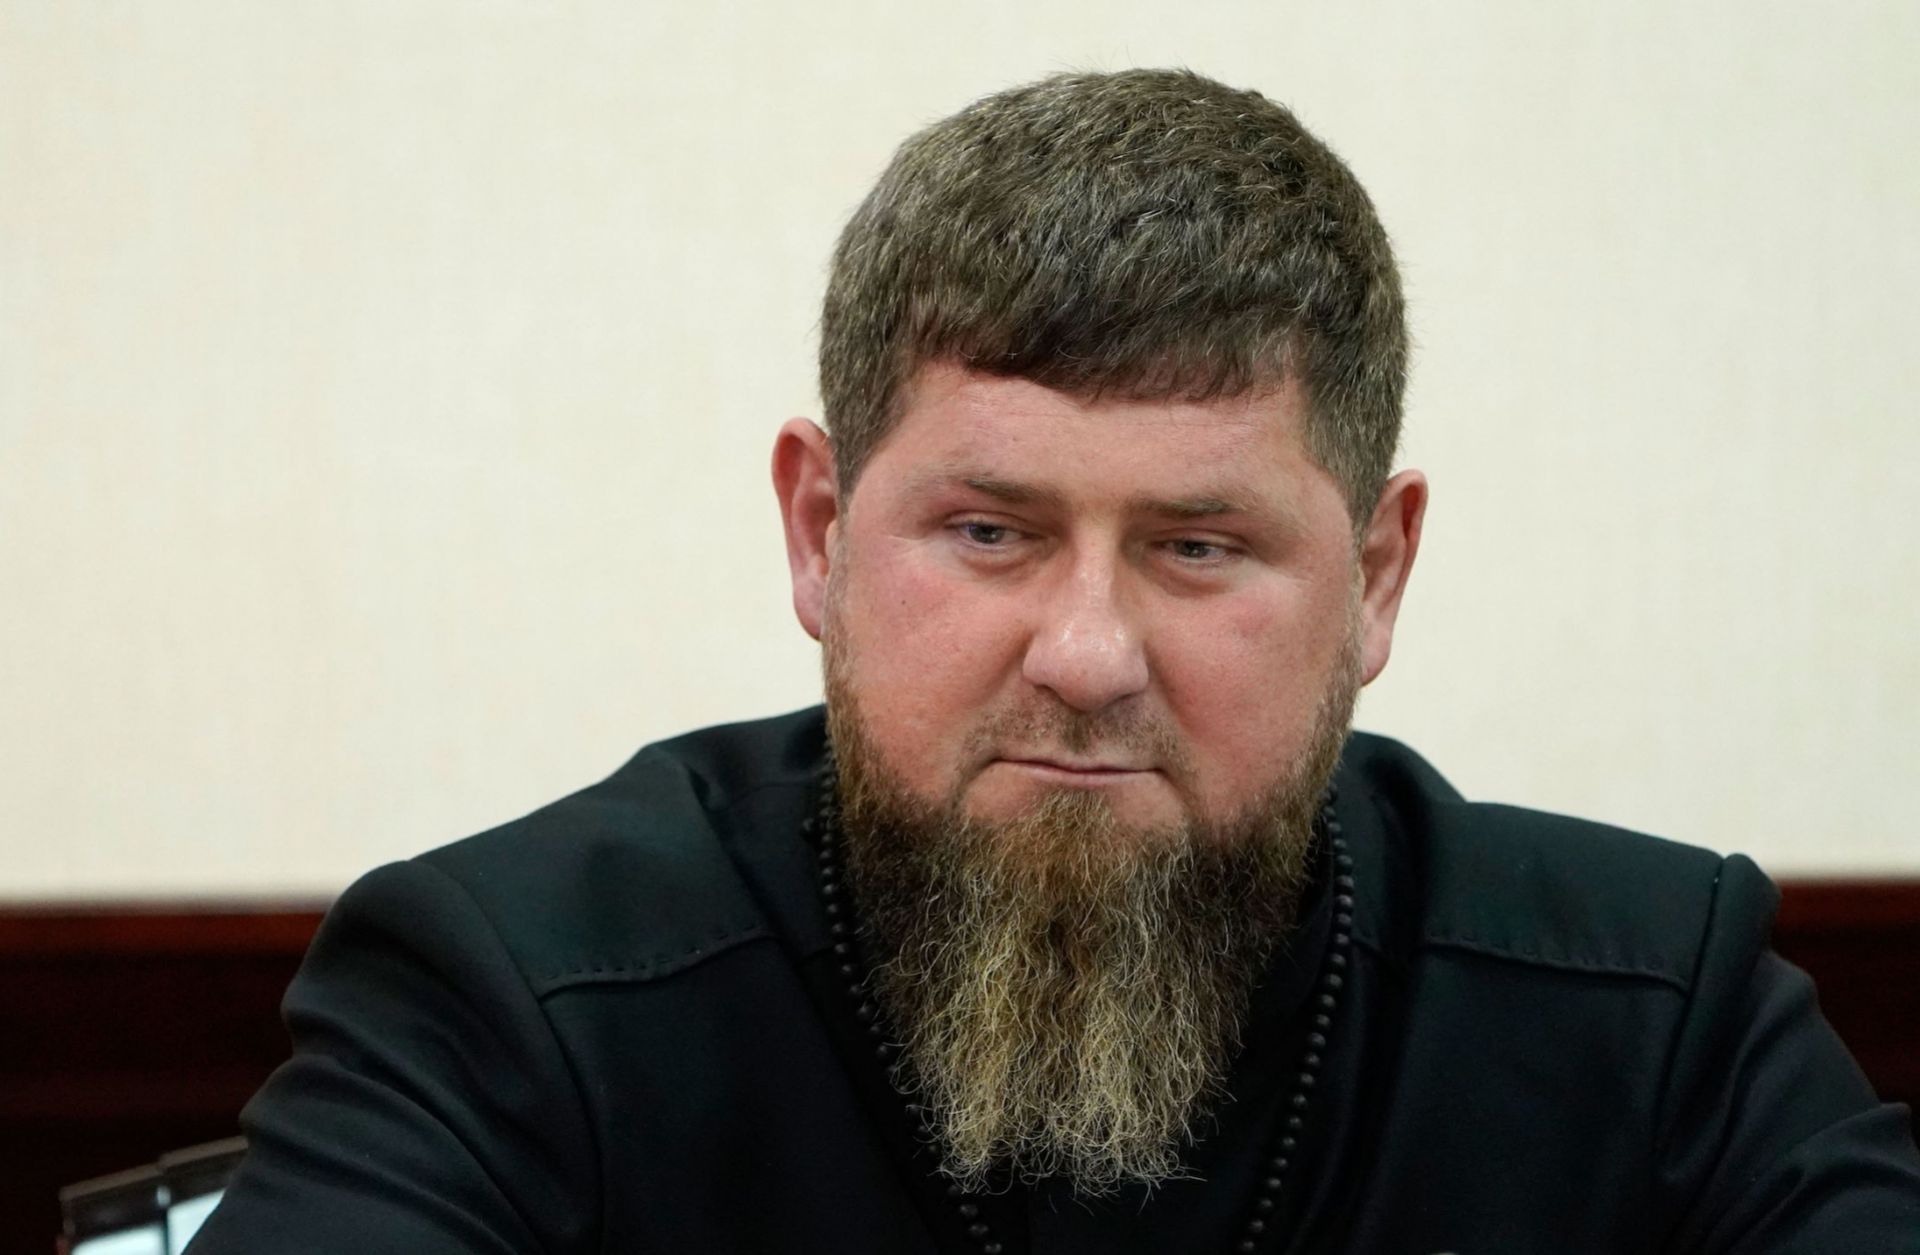 Chechen leader Ramzan Kadyrov attends a meeting of the Council on Interethnic Relations on May 19, 2023, in Pyatigorsk, Stavropol Krai region, Russia.